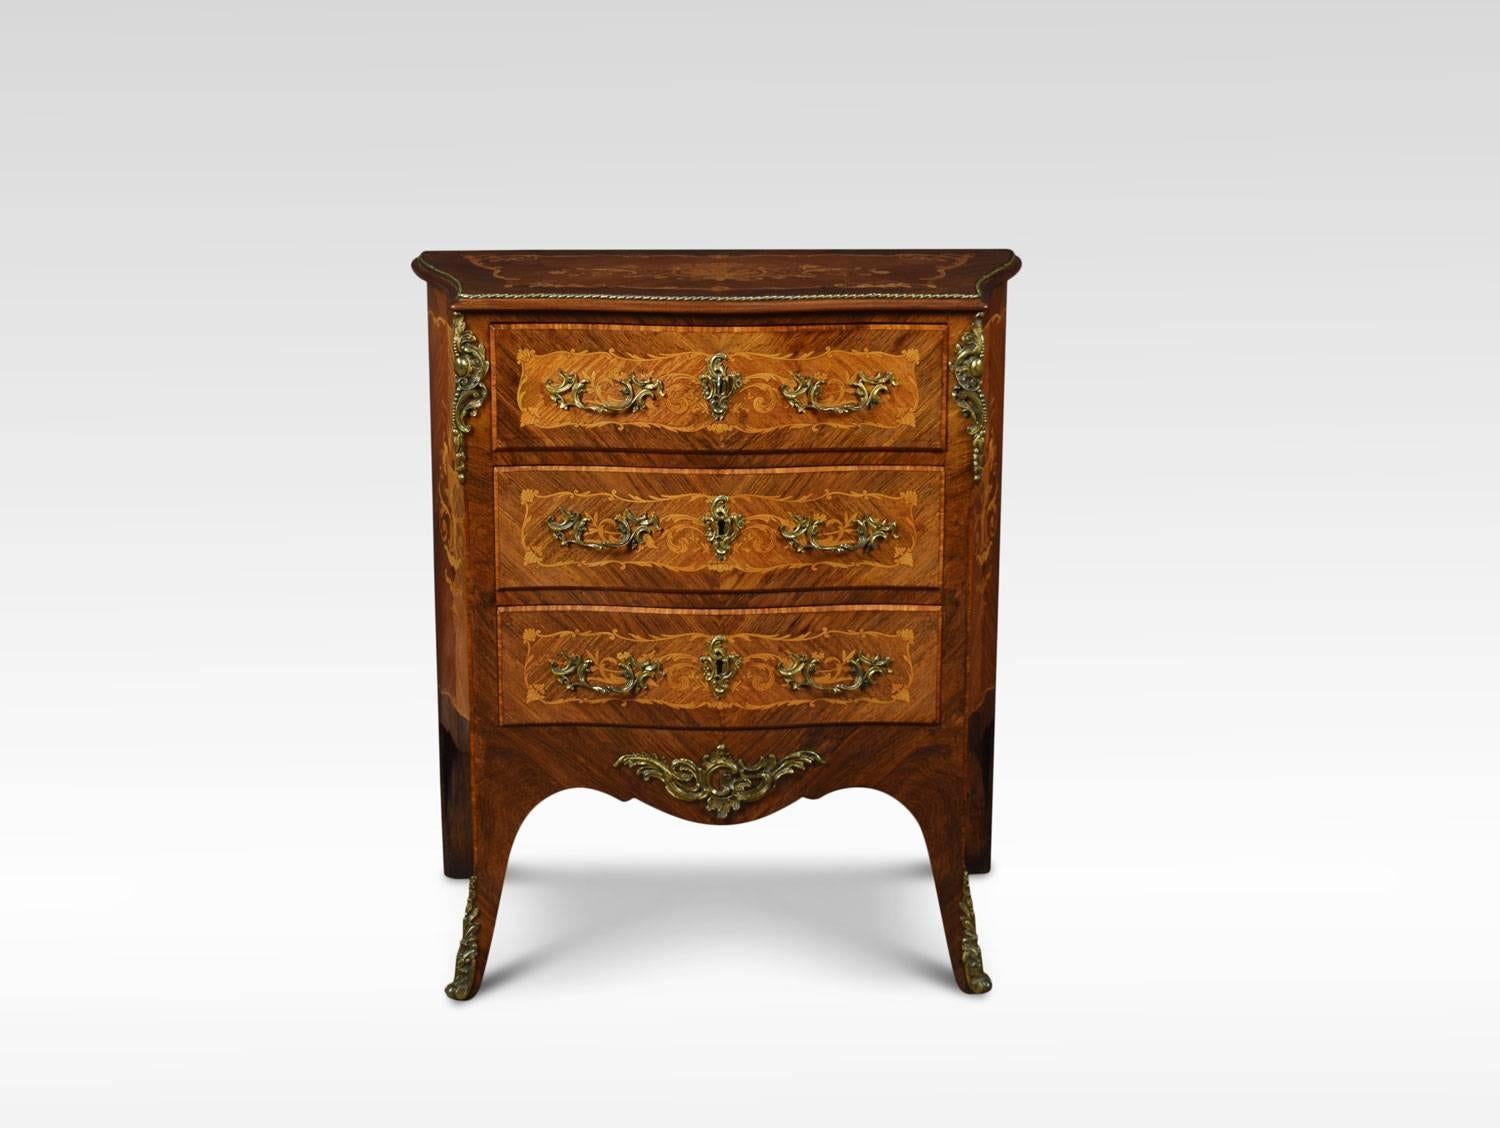 French Gilt Metal-Mounted Kingwood and Rosewood Marquetry Commode